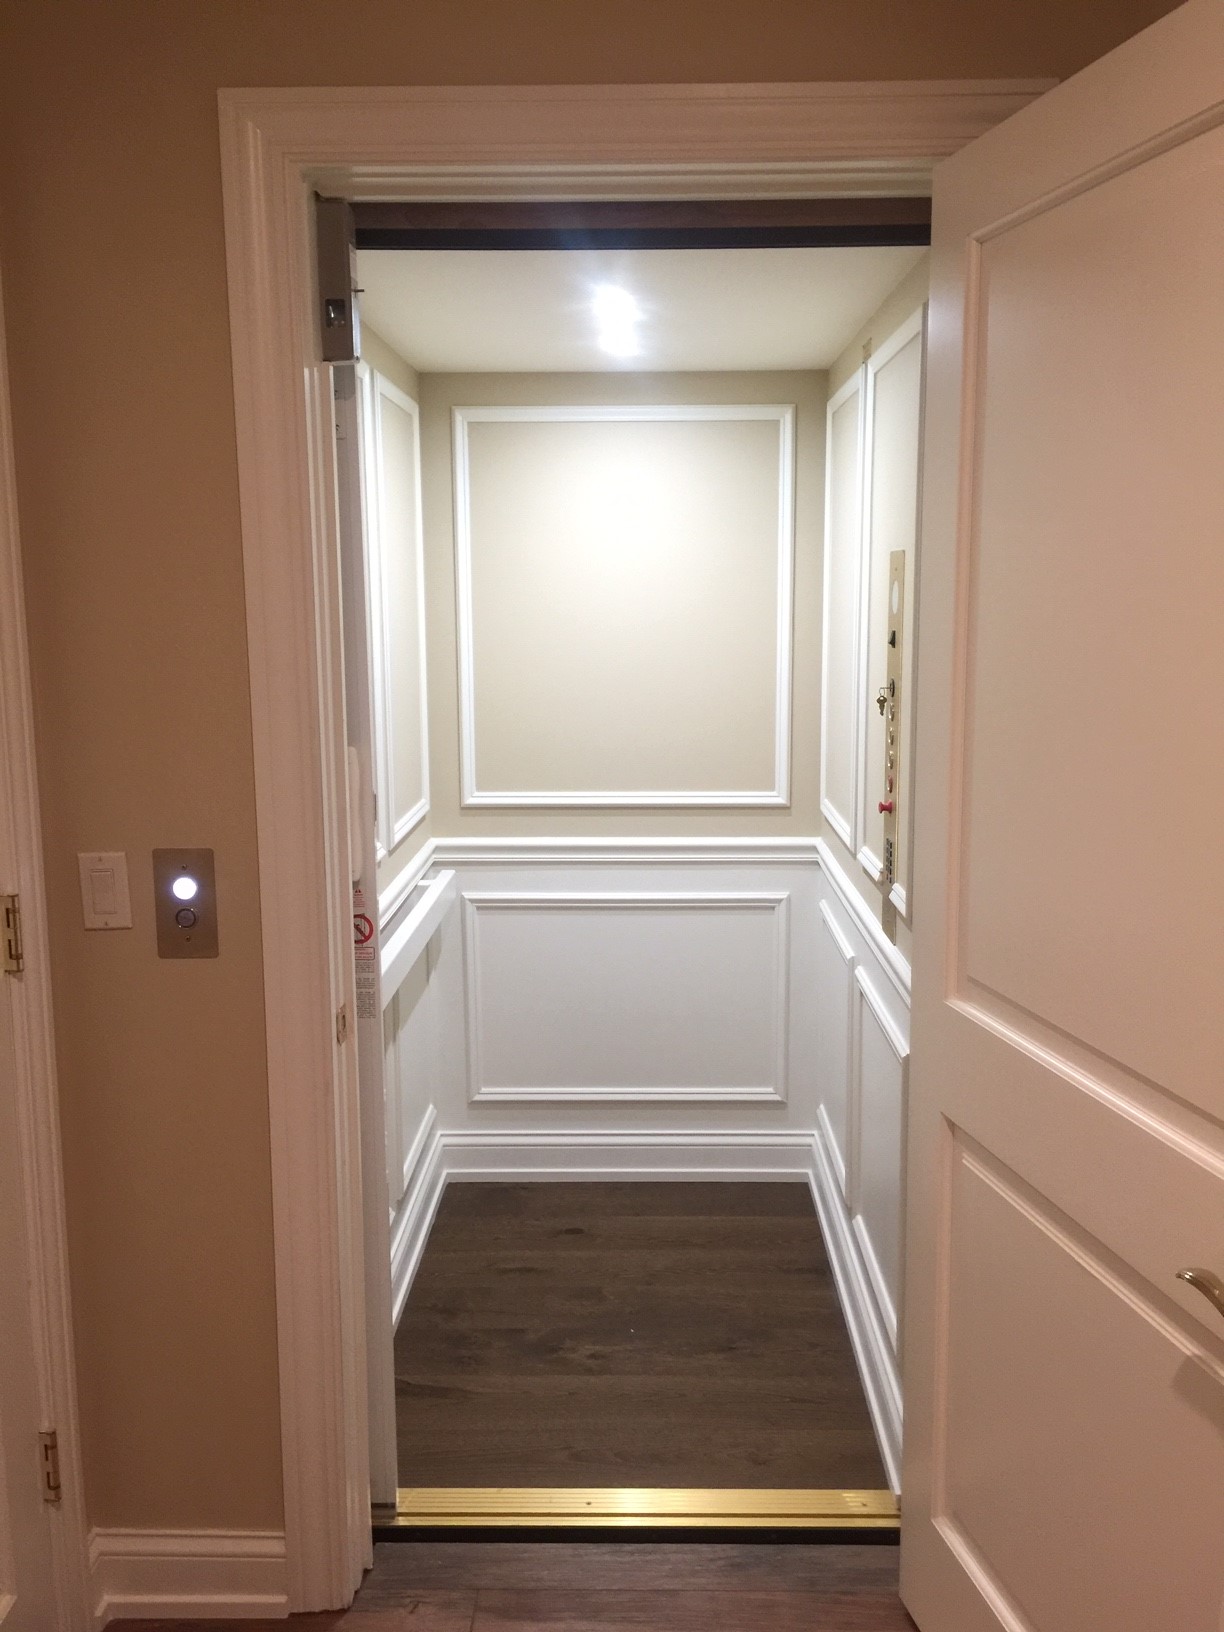 Home Elevator installed by Lifeway Mobility in Park Ridge, IL